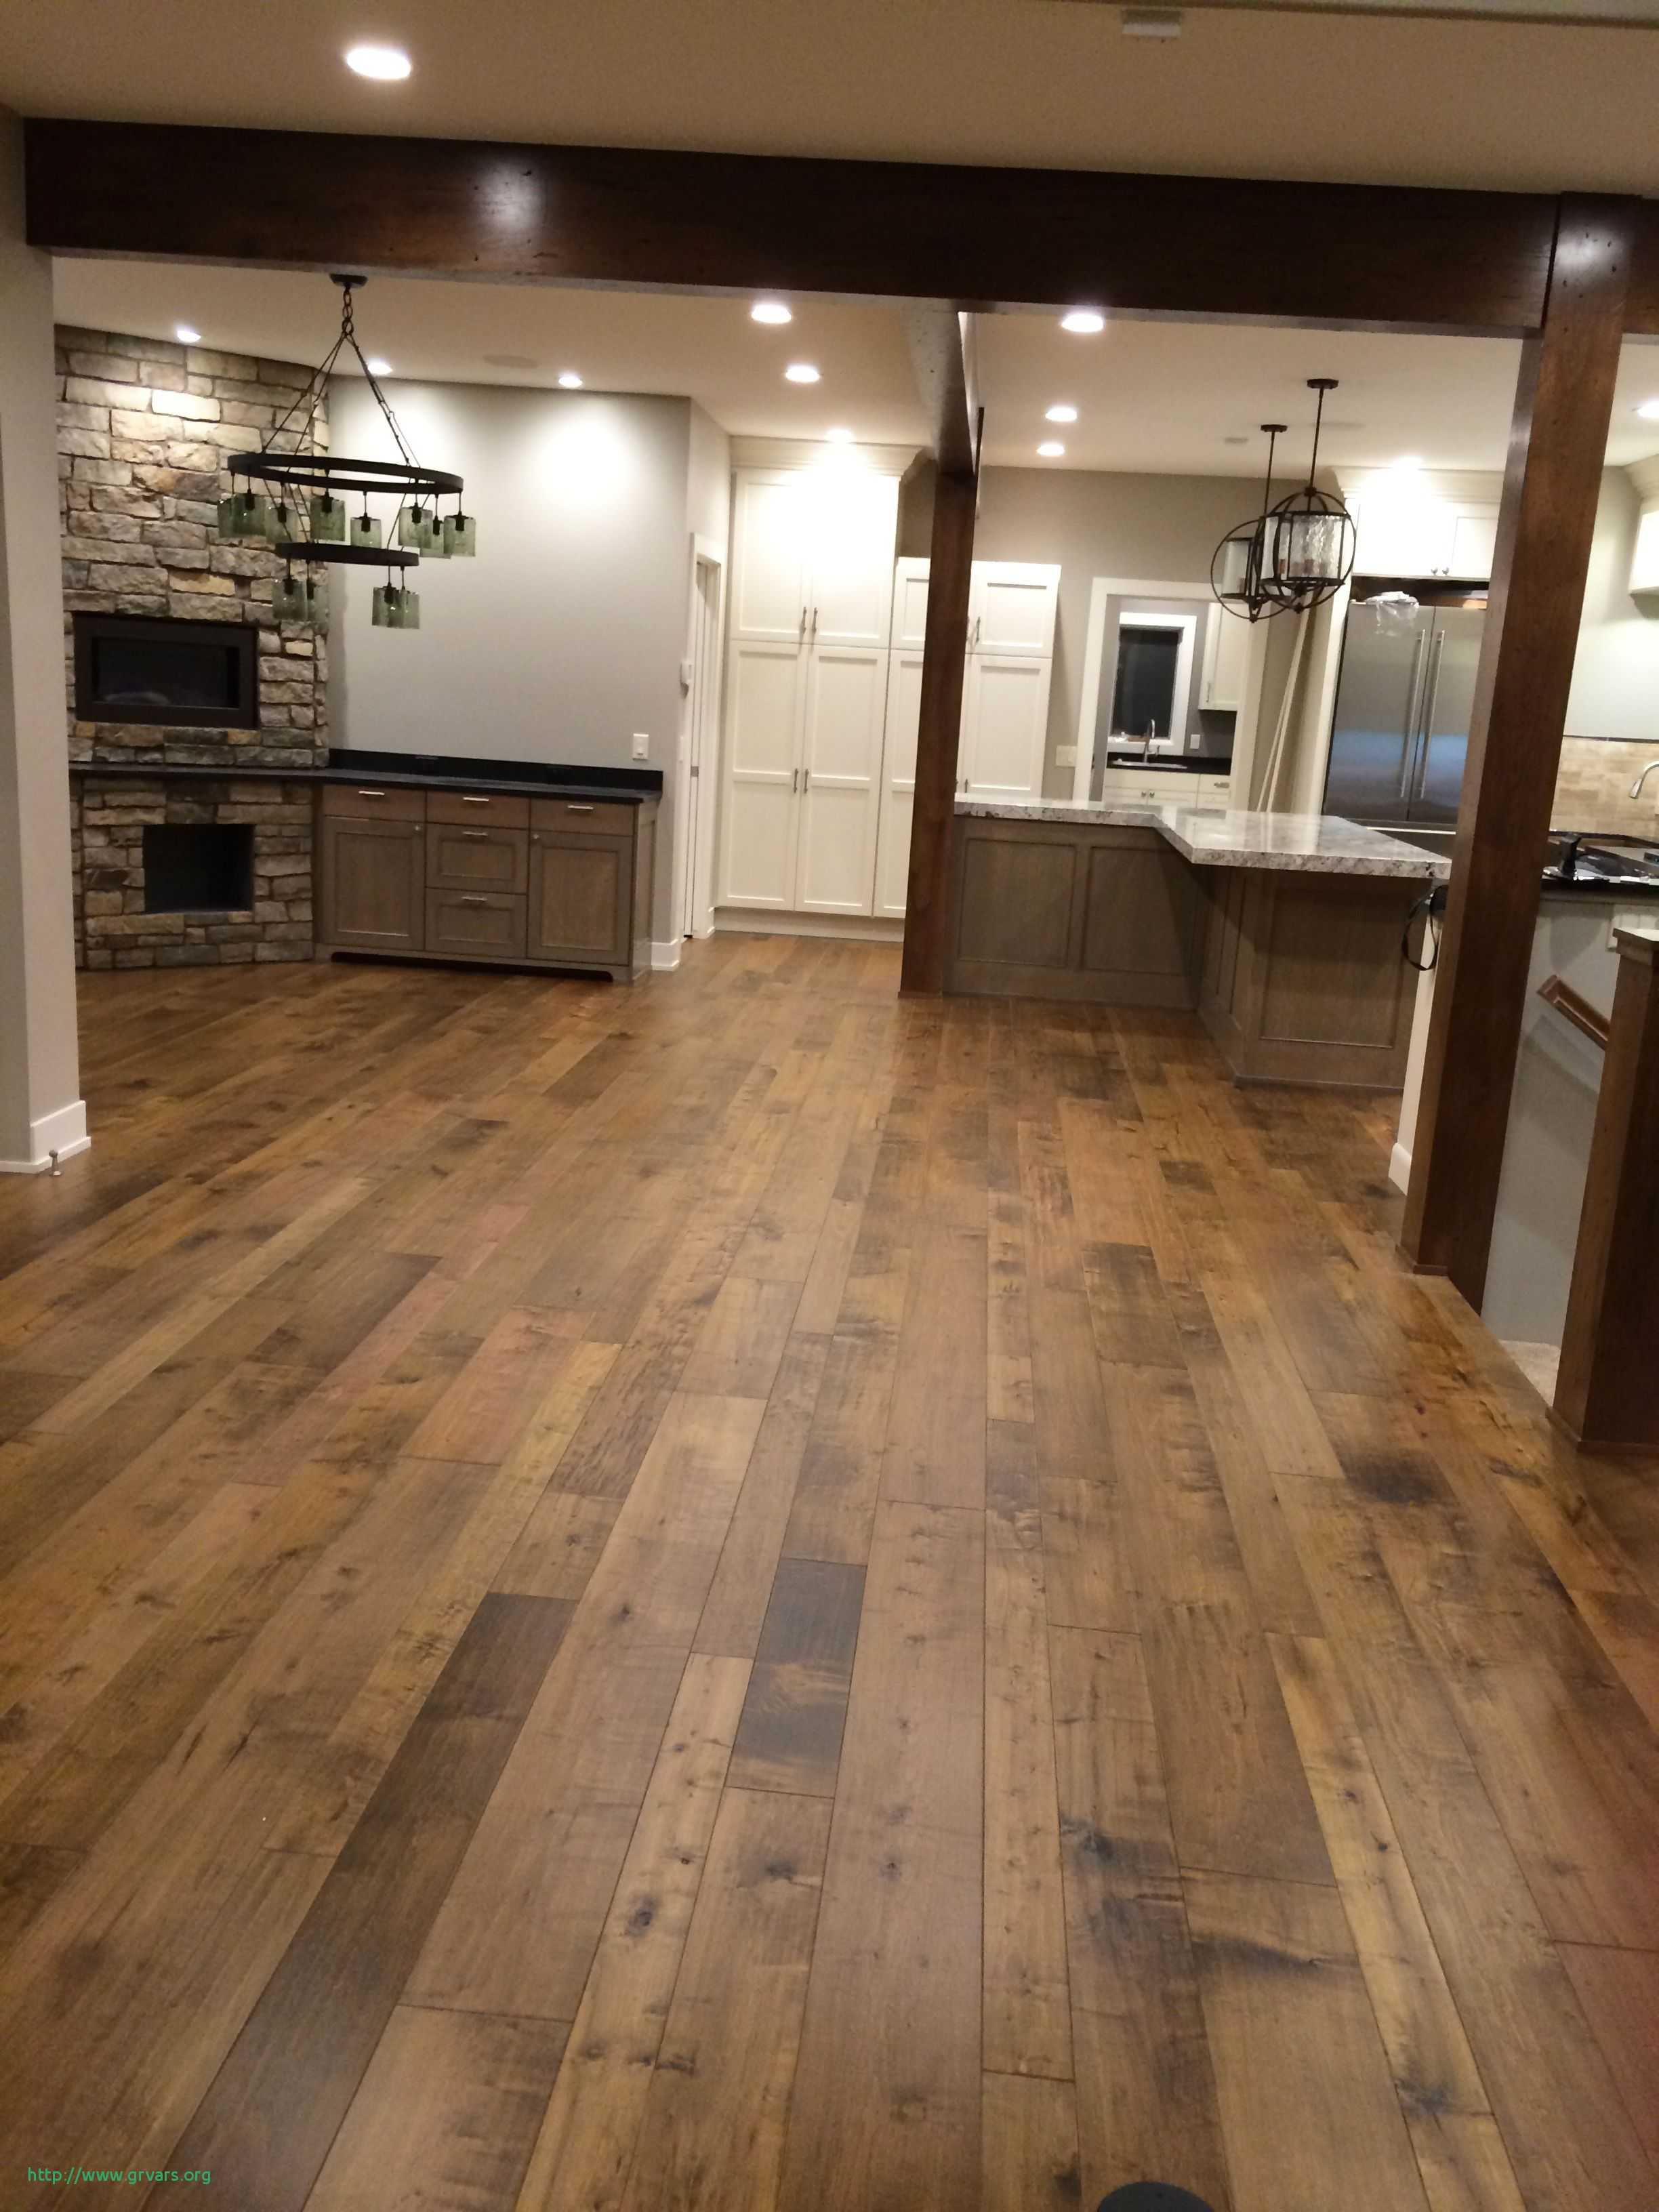 15 Stylish Can Bruce Engineered Hardwood Floors Be Refinished 2024 free download can bruce engineered hardwood floors be refinished of 23 meilleur de can u refinish engineered hardwood floors ideas blog regarding the floors were purchased from carpets direct and installe